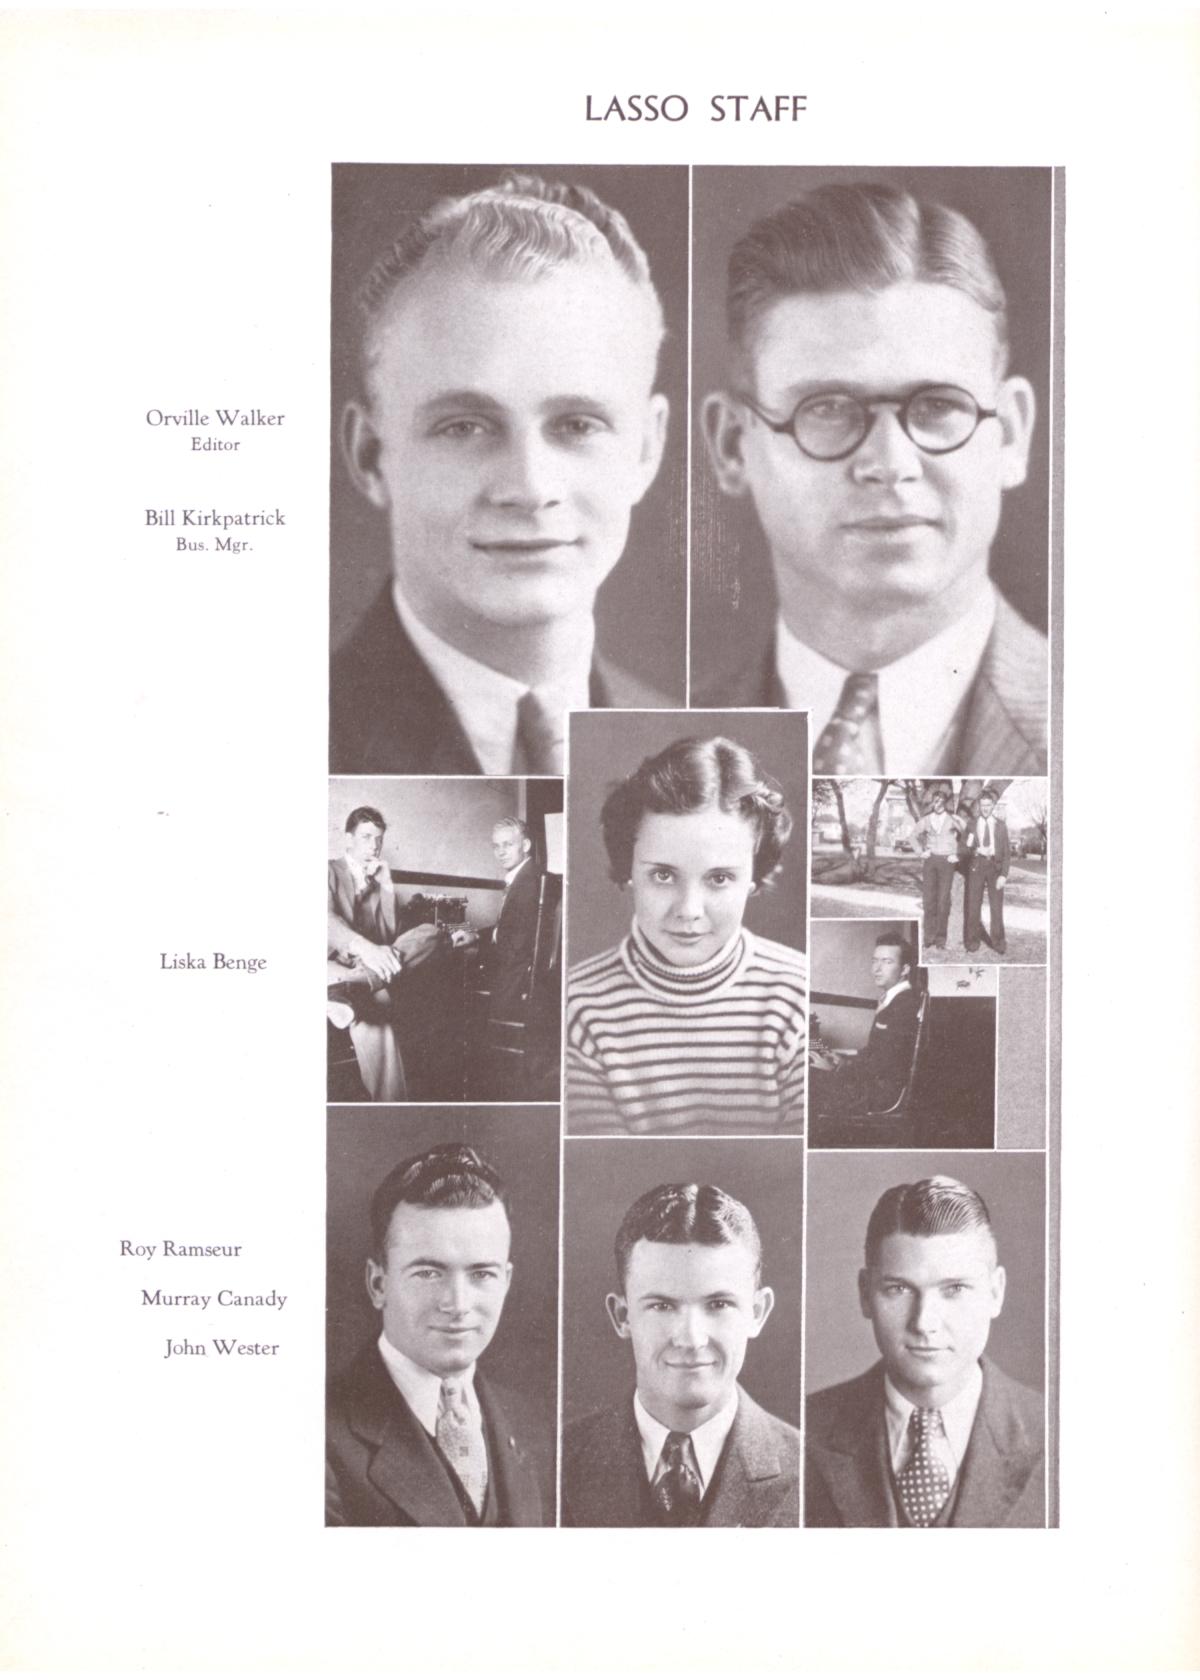 The Lasso, Yearbook of Howard Payne College, 1933
                                                
                                                    46
                                                